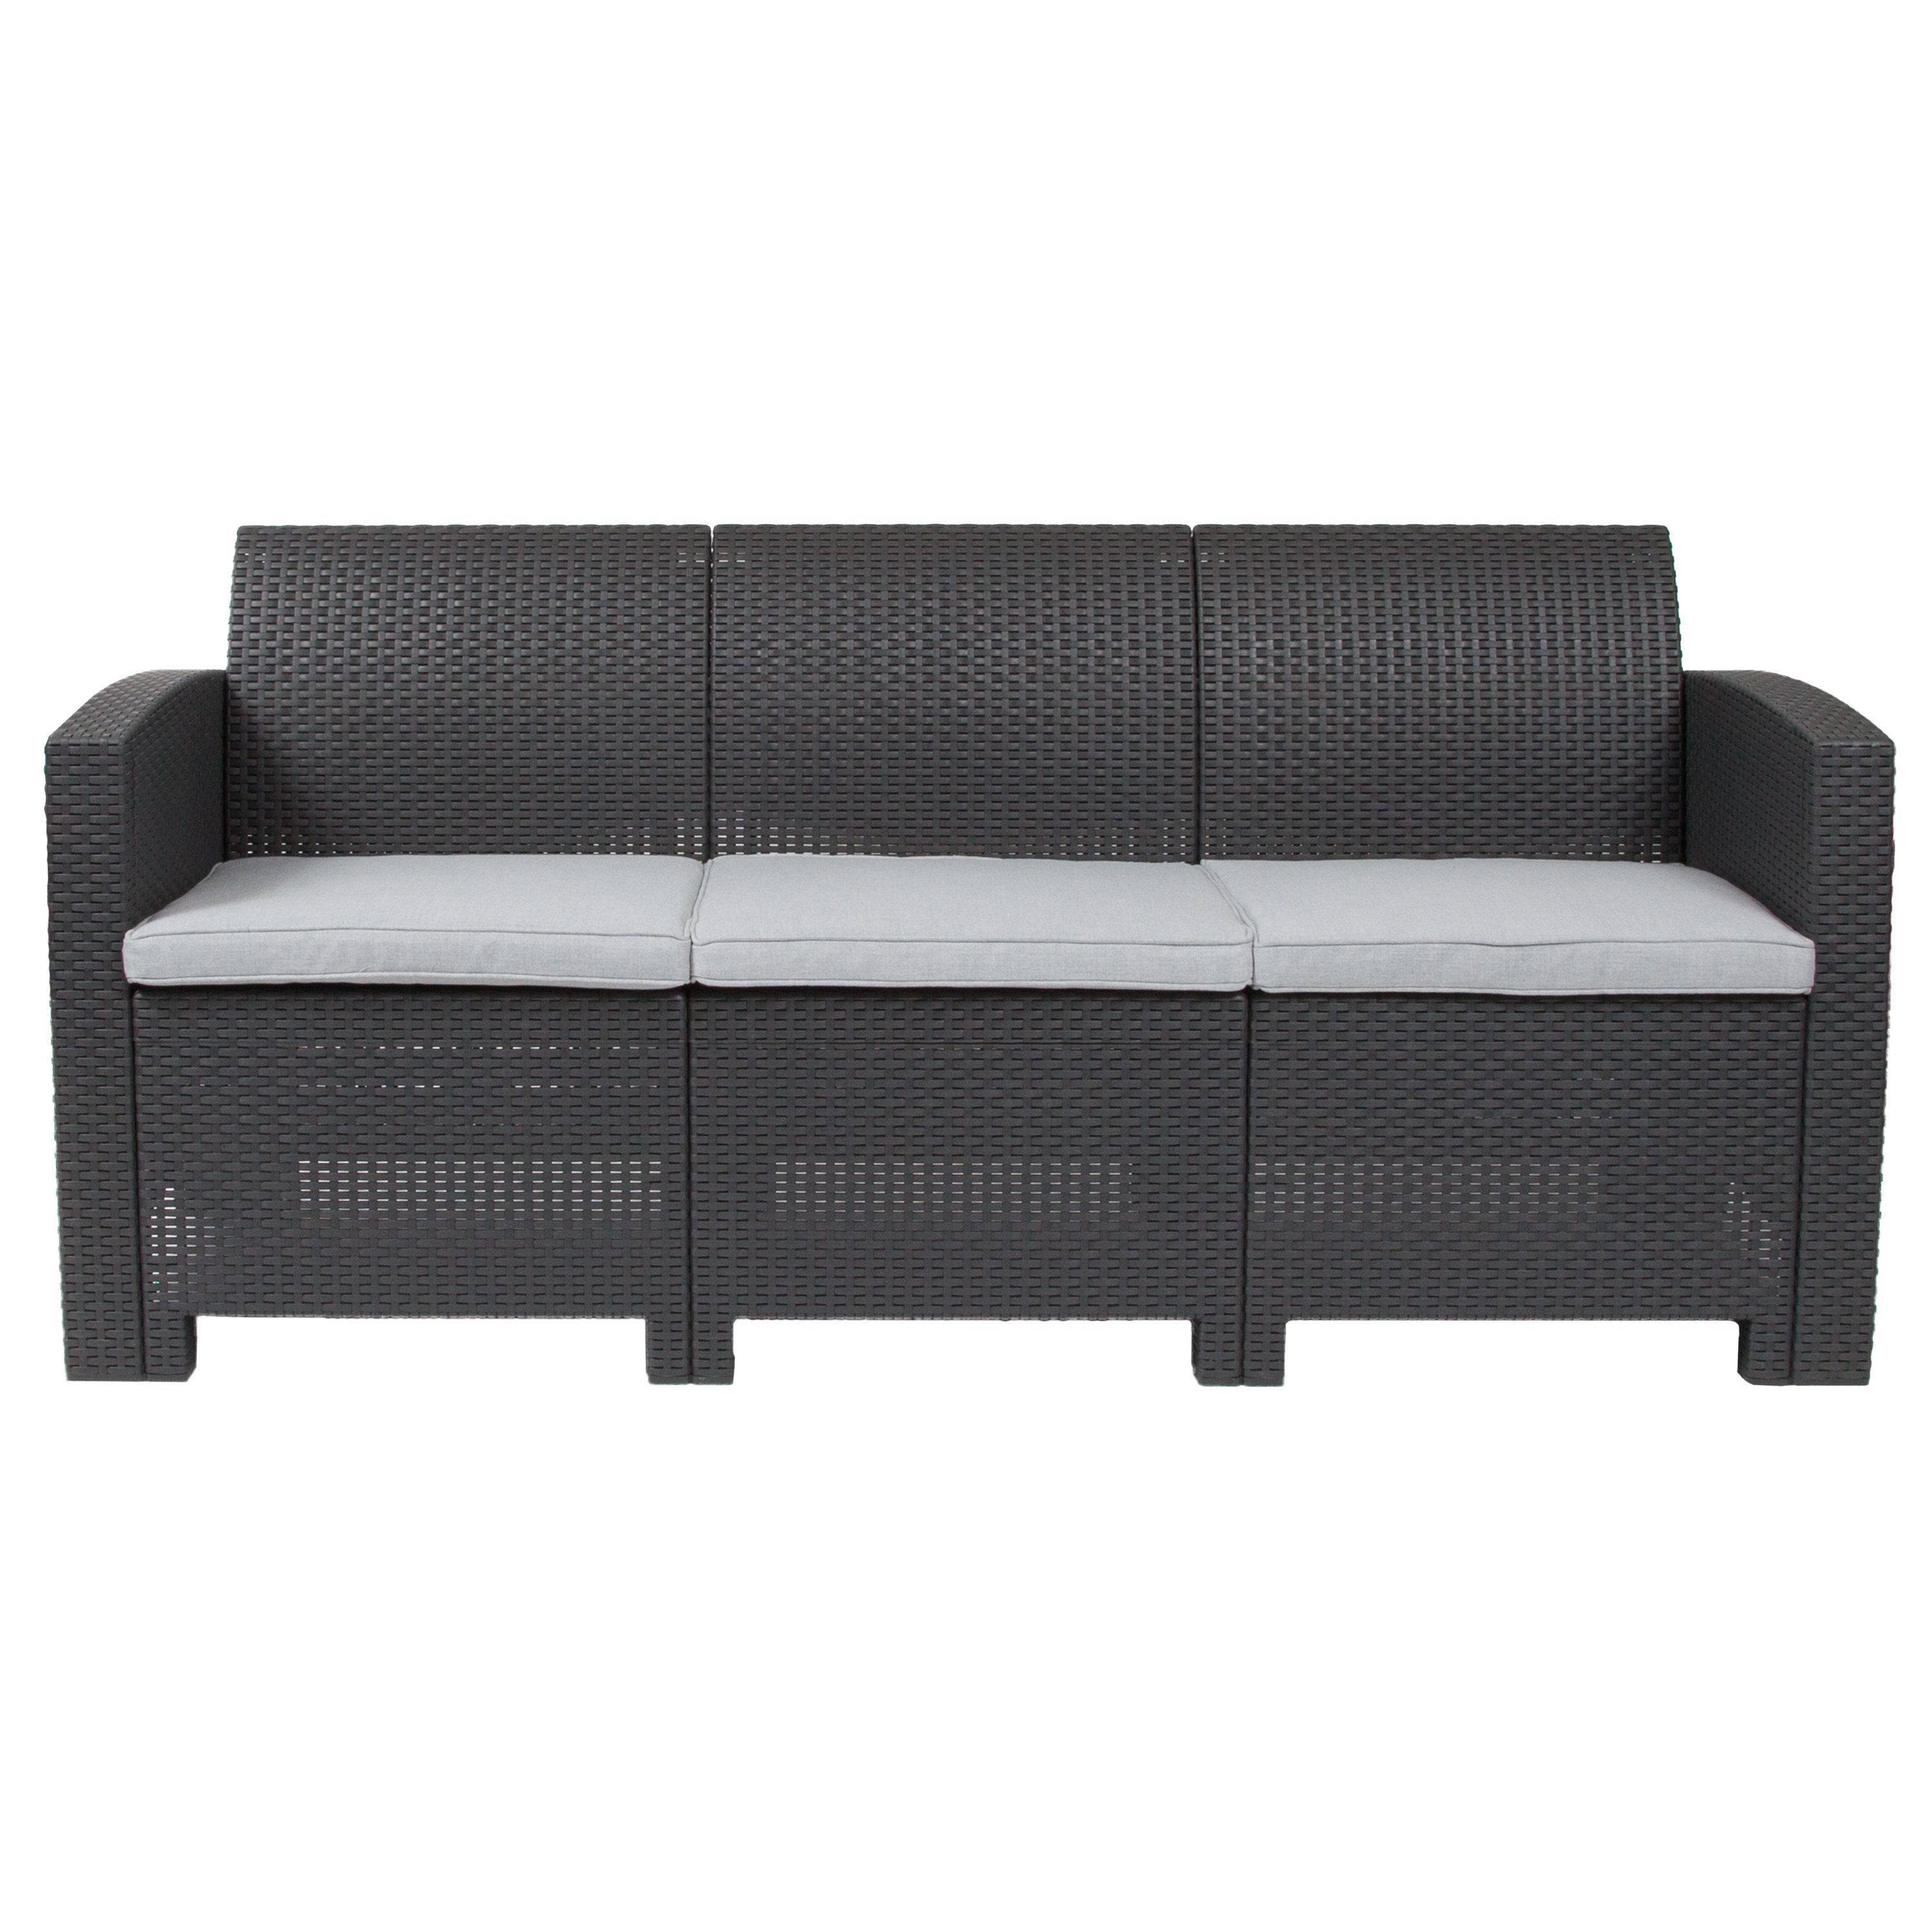 Most Recently Released Patio Sofas With Cushions Throughout Stockwell Patio Sofa With Cushions (View 15 of 20)